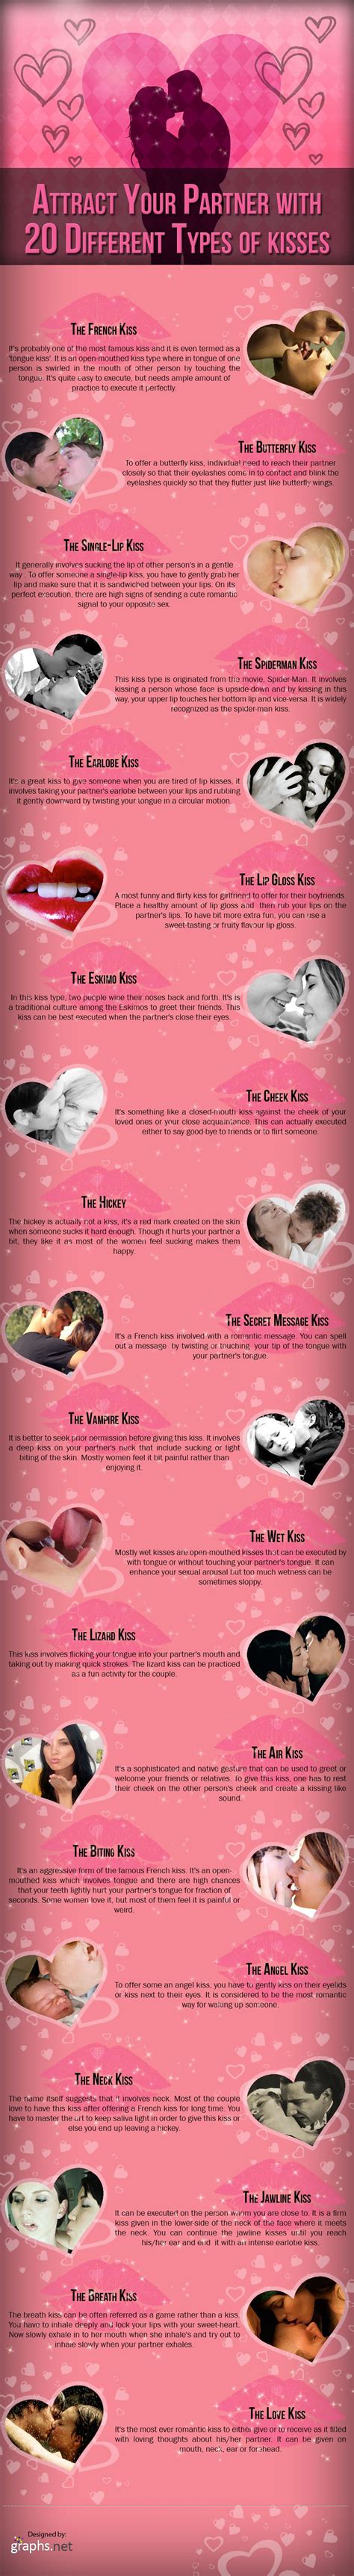 Attract Your Partner With 20 Different Types Of Kisses